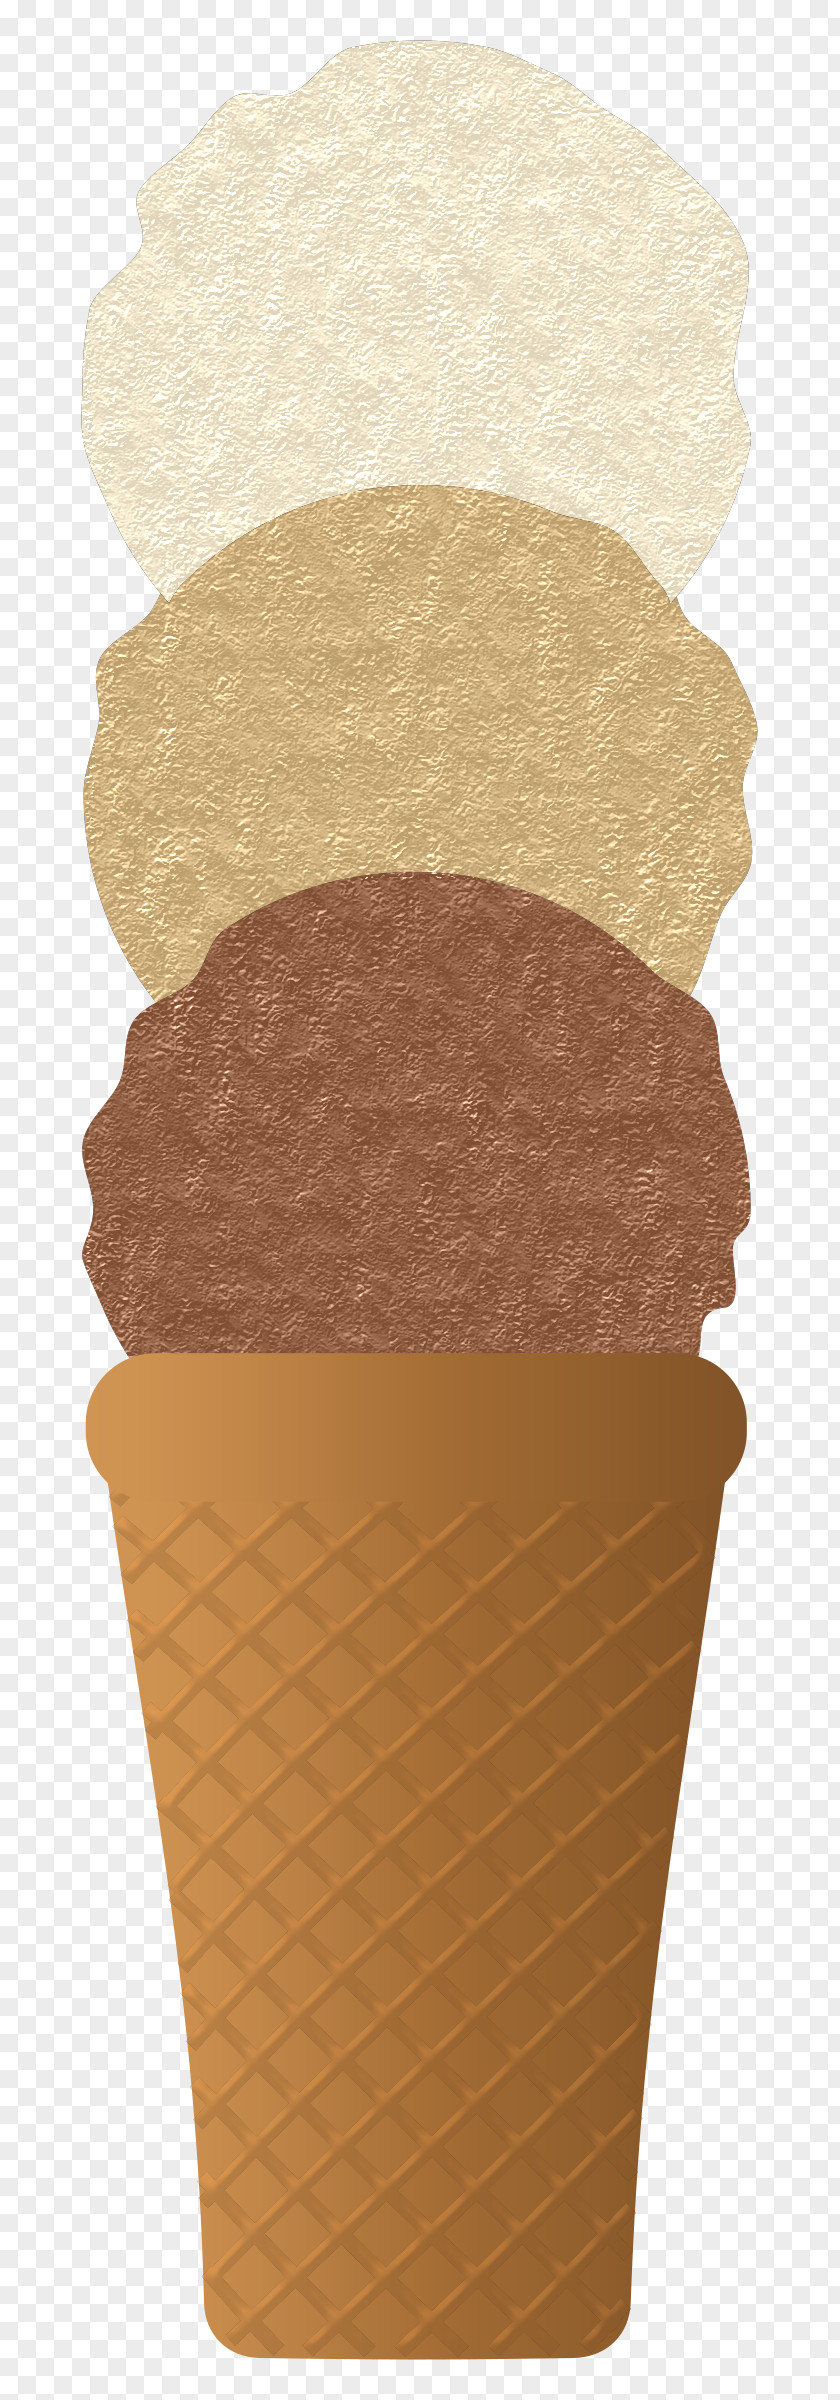 Cones Ice Cream Waffle Food PNG